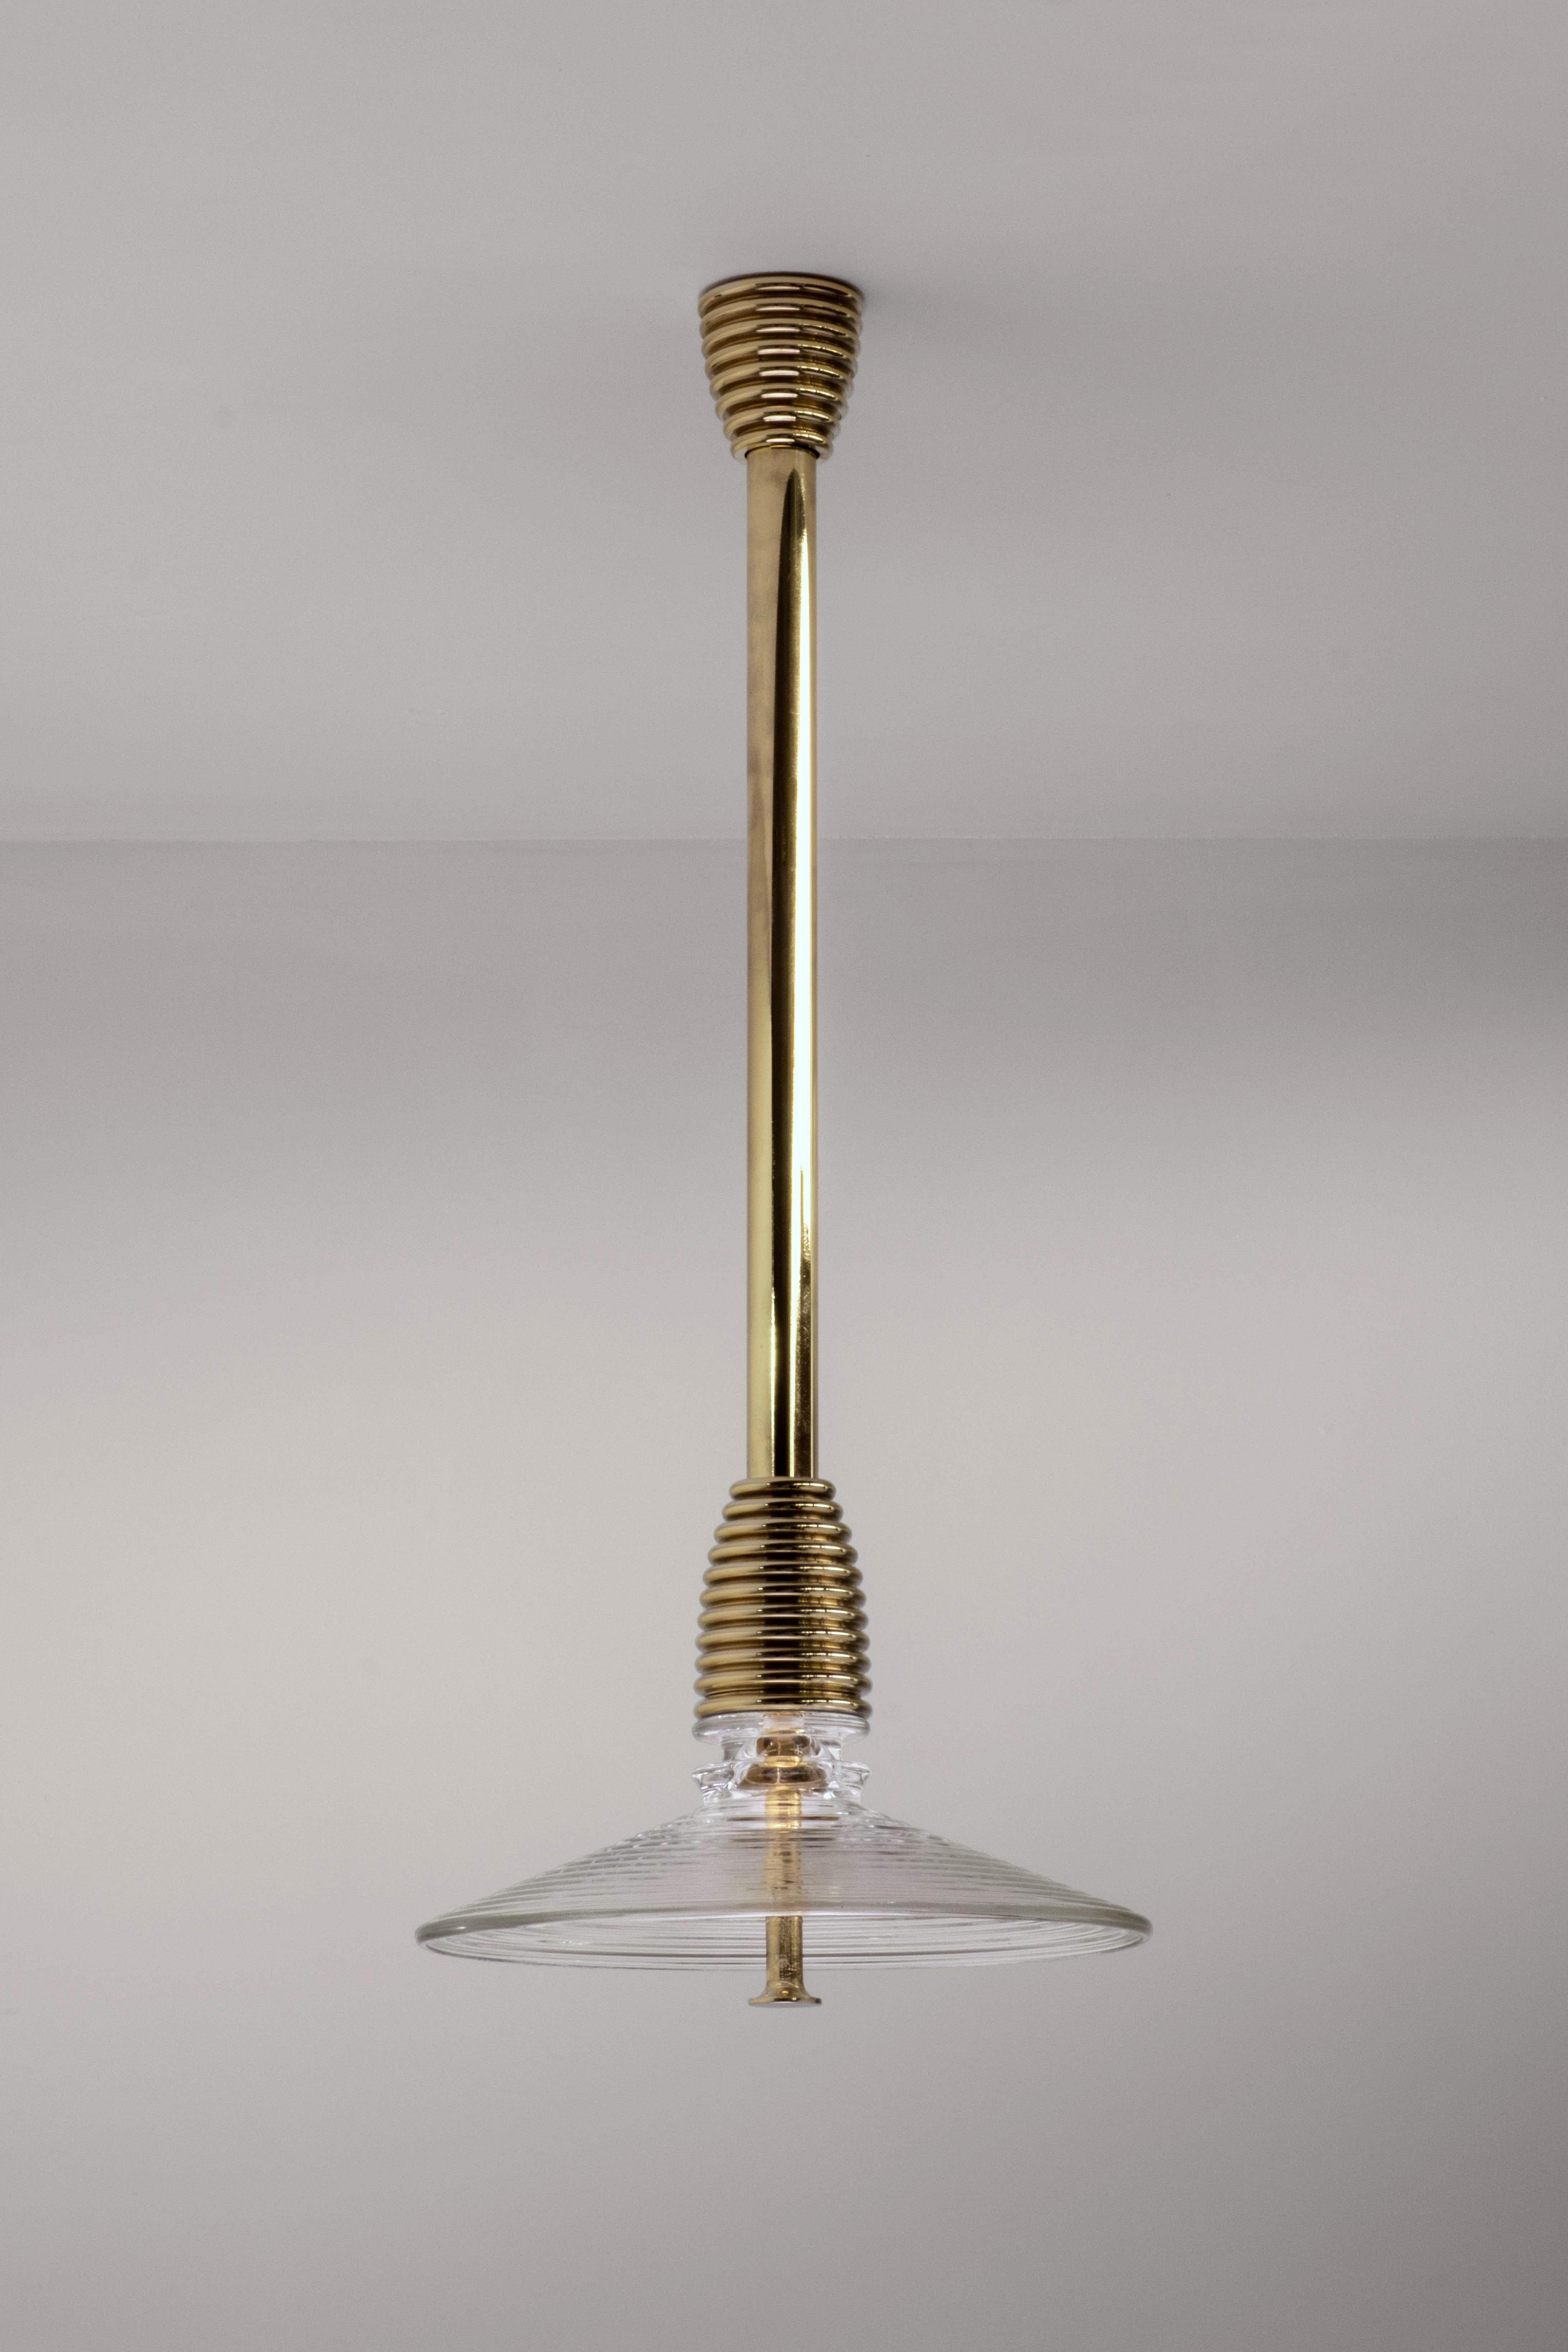 Insulator B Clear Glass and Polished Brass Pendant by Novocastrian
Dimensions: Ø 32 x H 21 cm. Rod lenght: 85 or 125 cm.
Materials: Clear glass and polished brass.  

All products are available in custom dimensions and finishes. Rods can be cut to